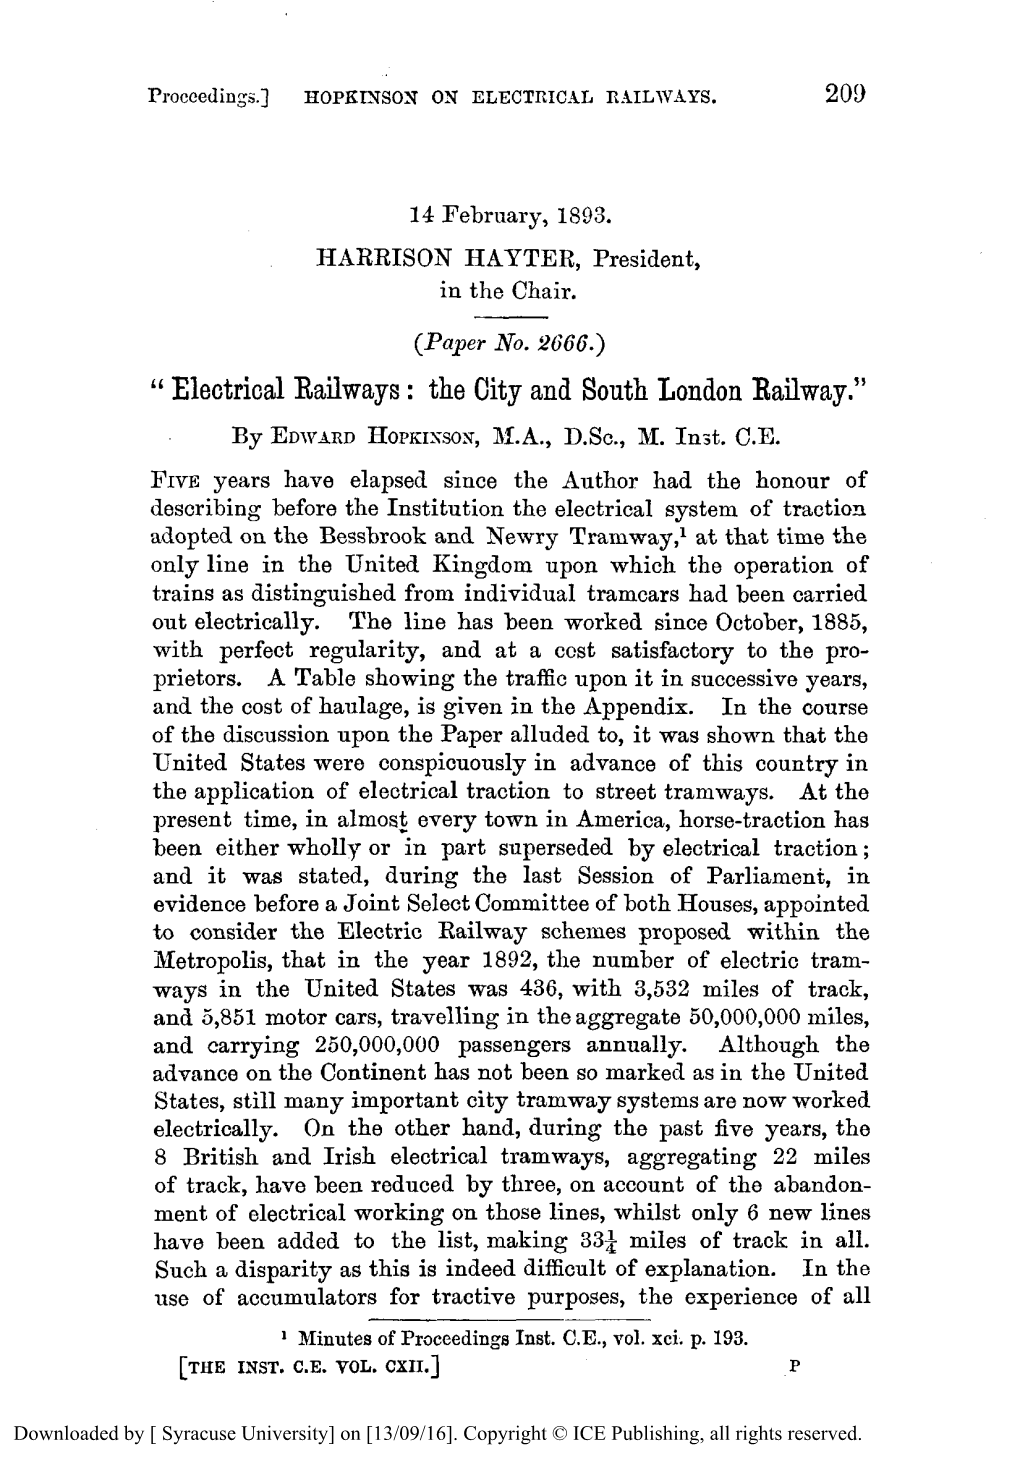 Electrical Railways : the City and South London Railway.” by EDWARDHOPKISSOX, M.A., D.Sc., M